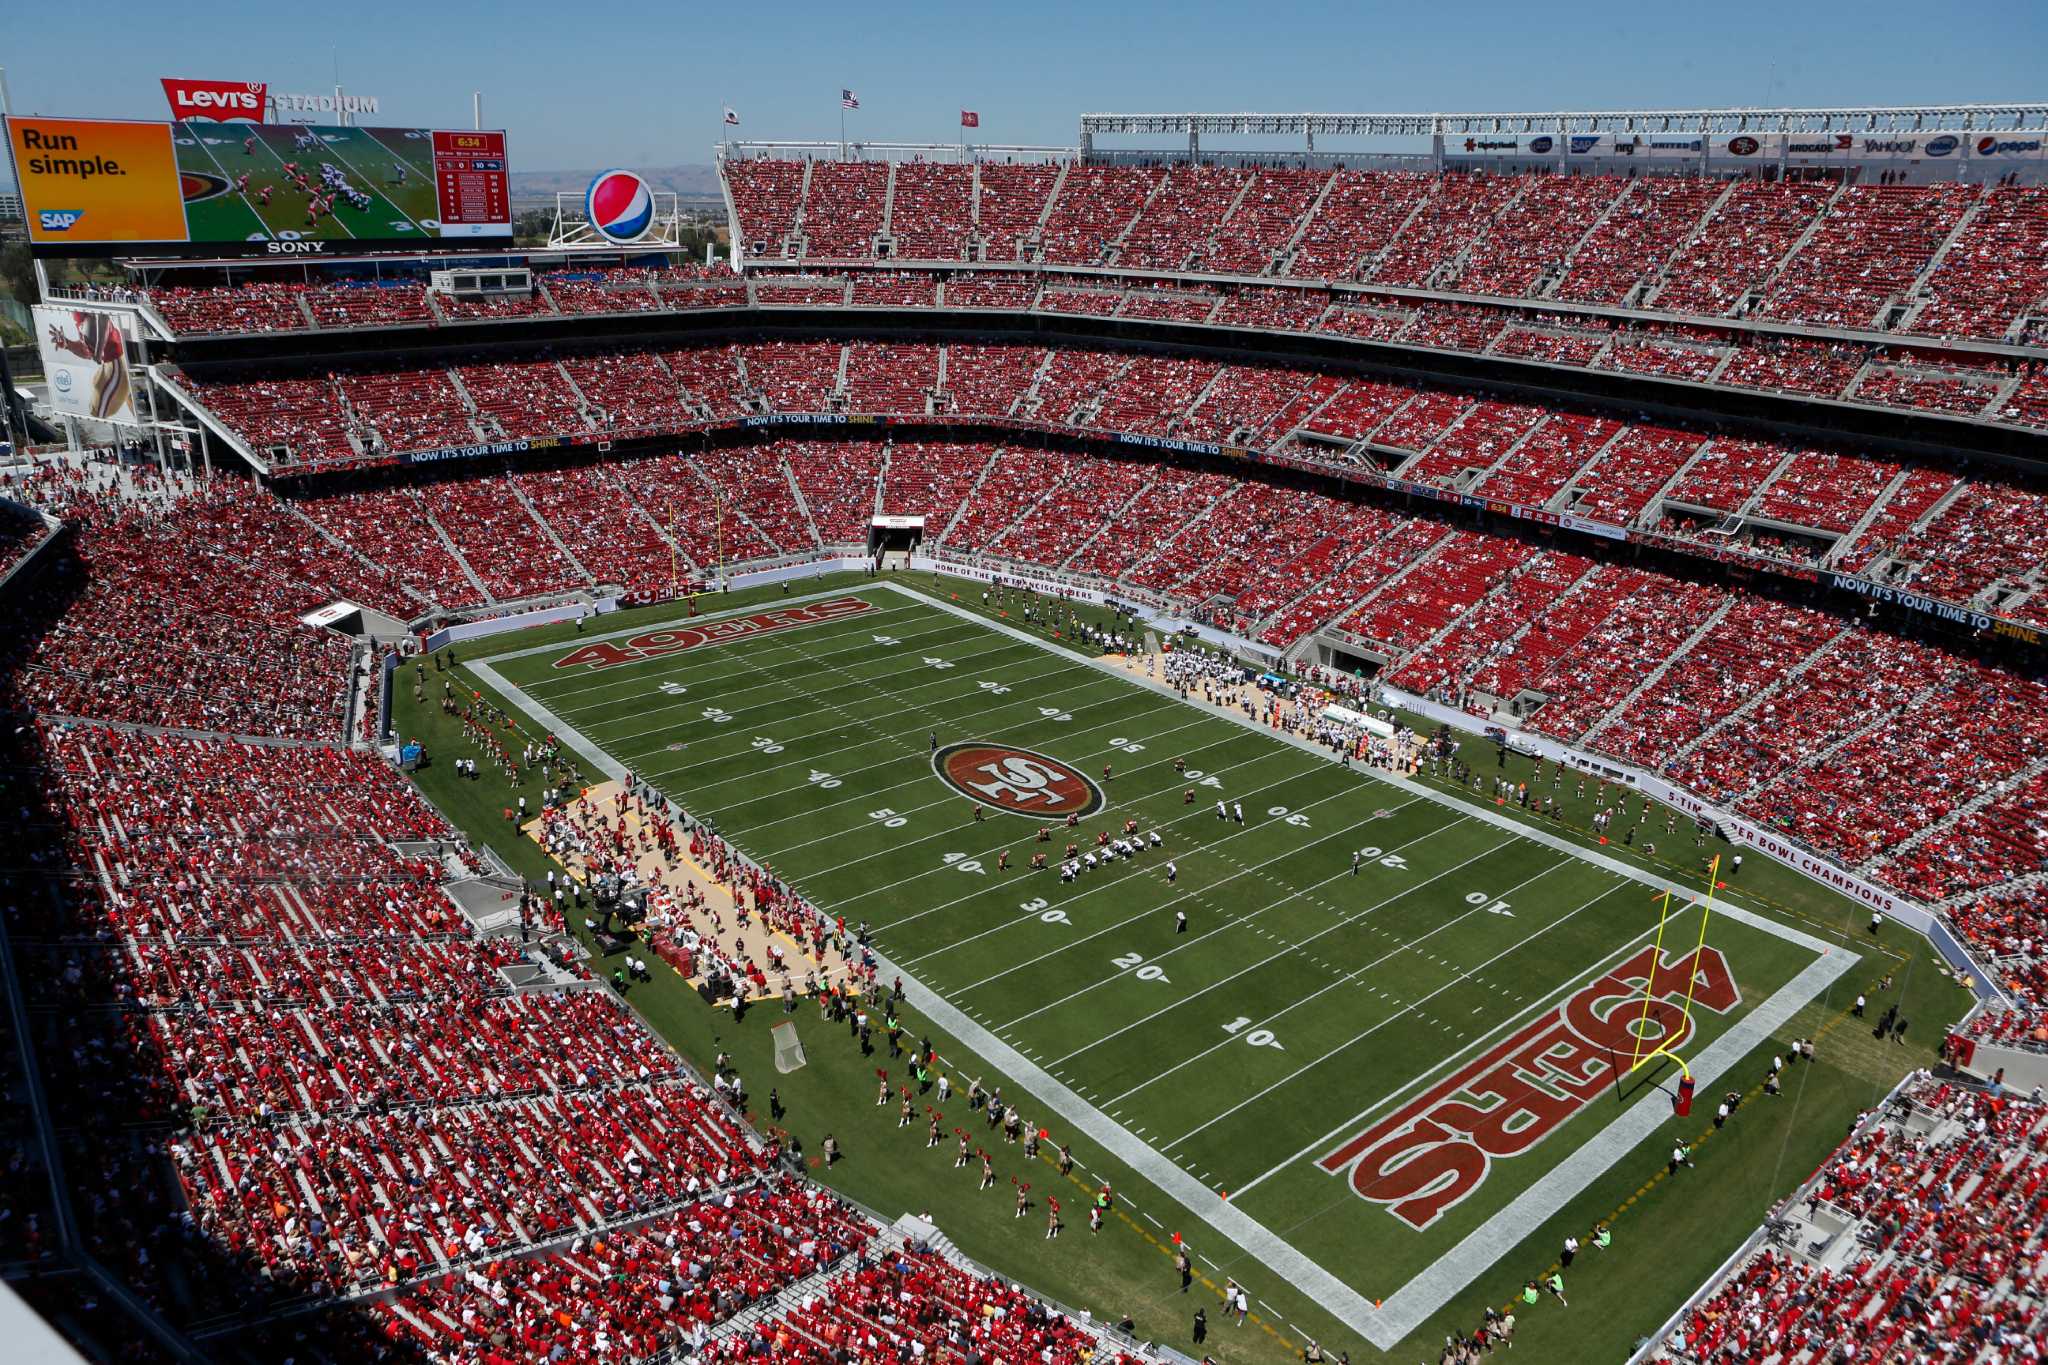 Levi's Stadium is a model for privately financed venues